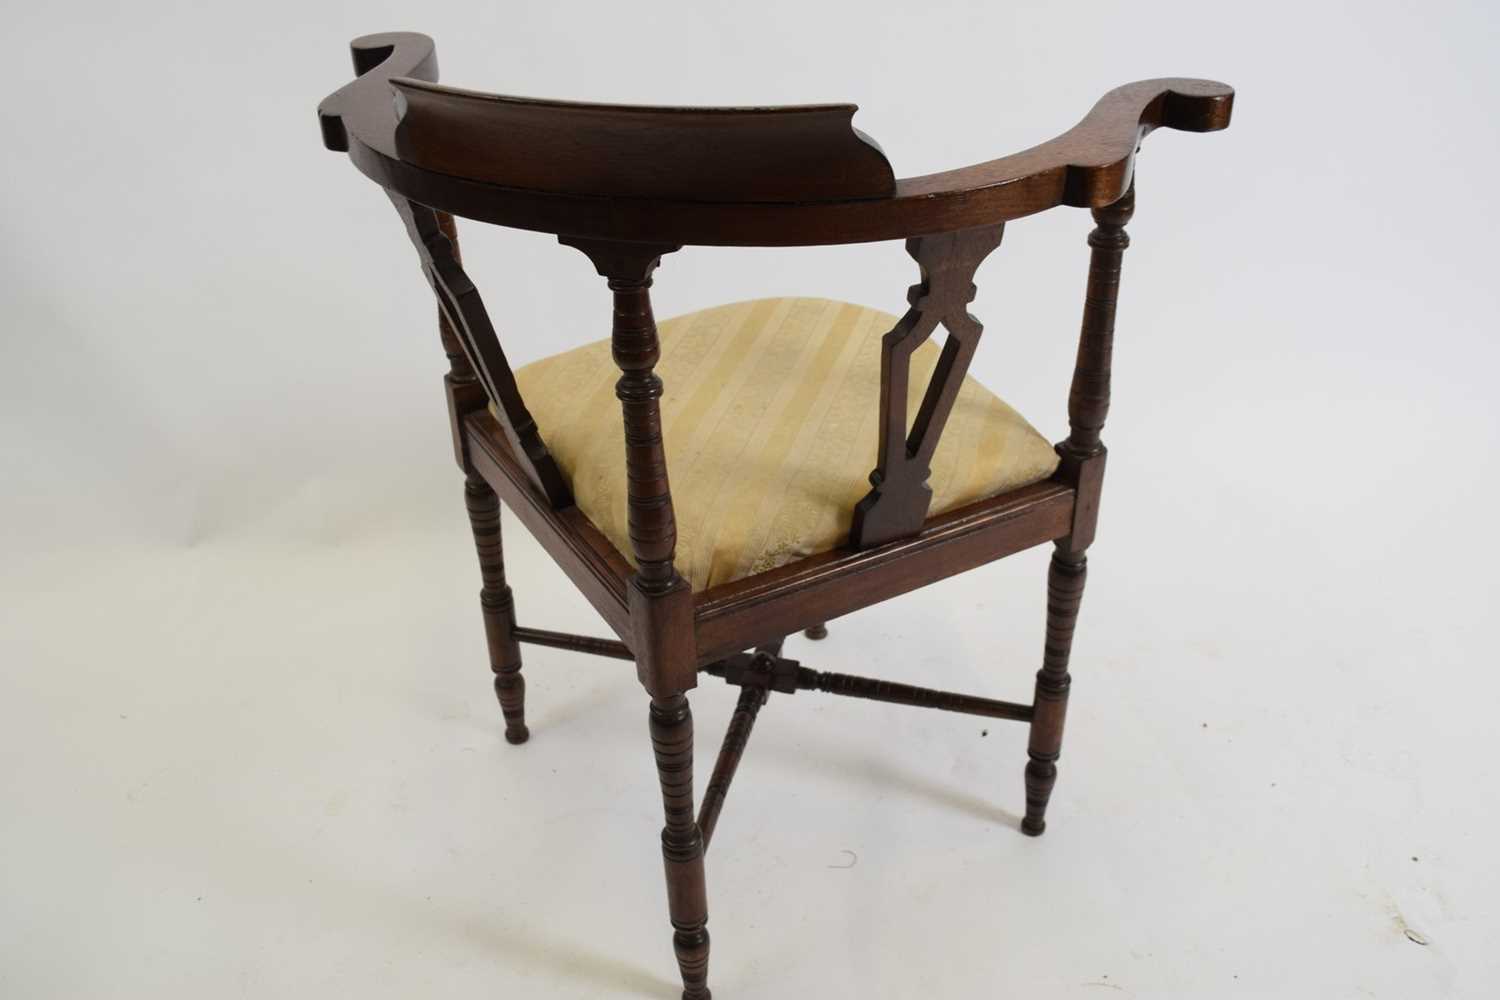 Edwardian mahogany framed corner chair with striped upholstered seats, 68cm wide - Image 3 of 3